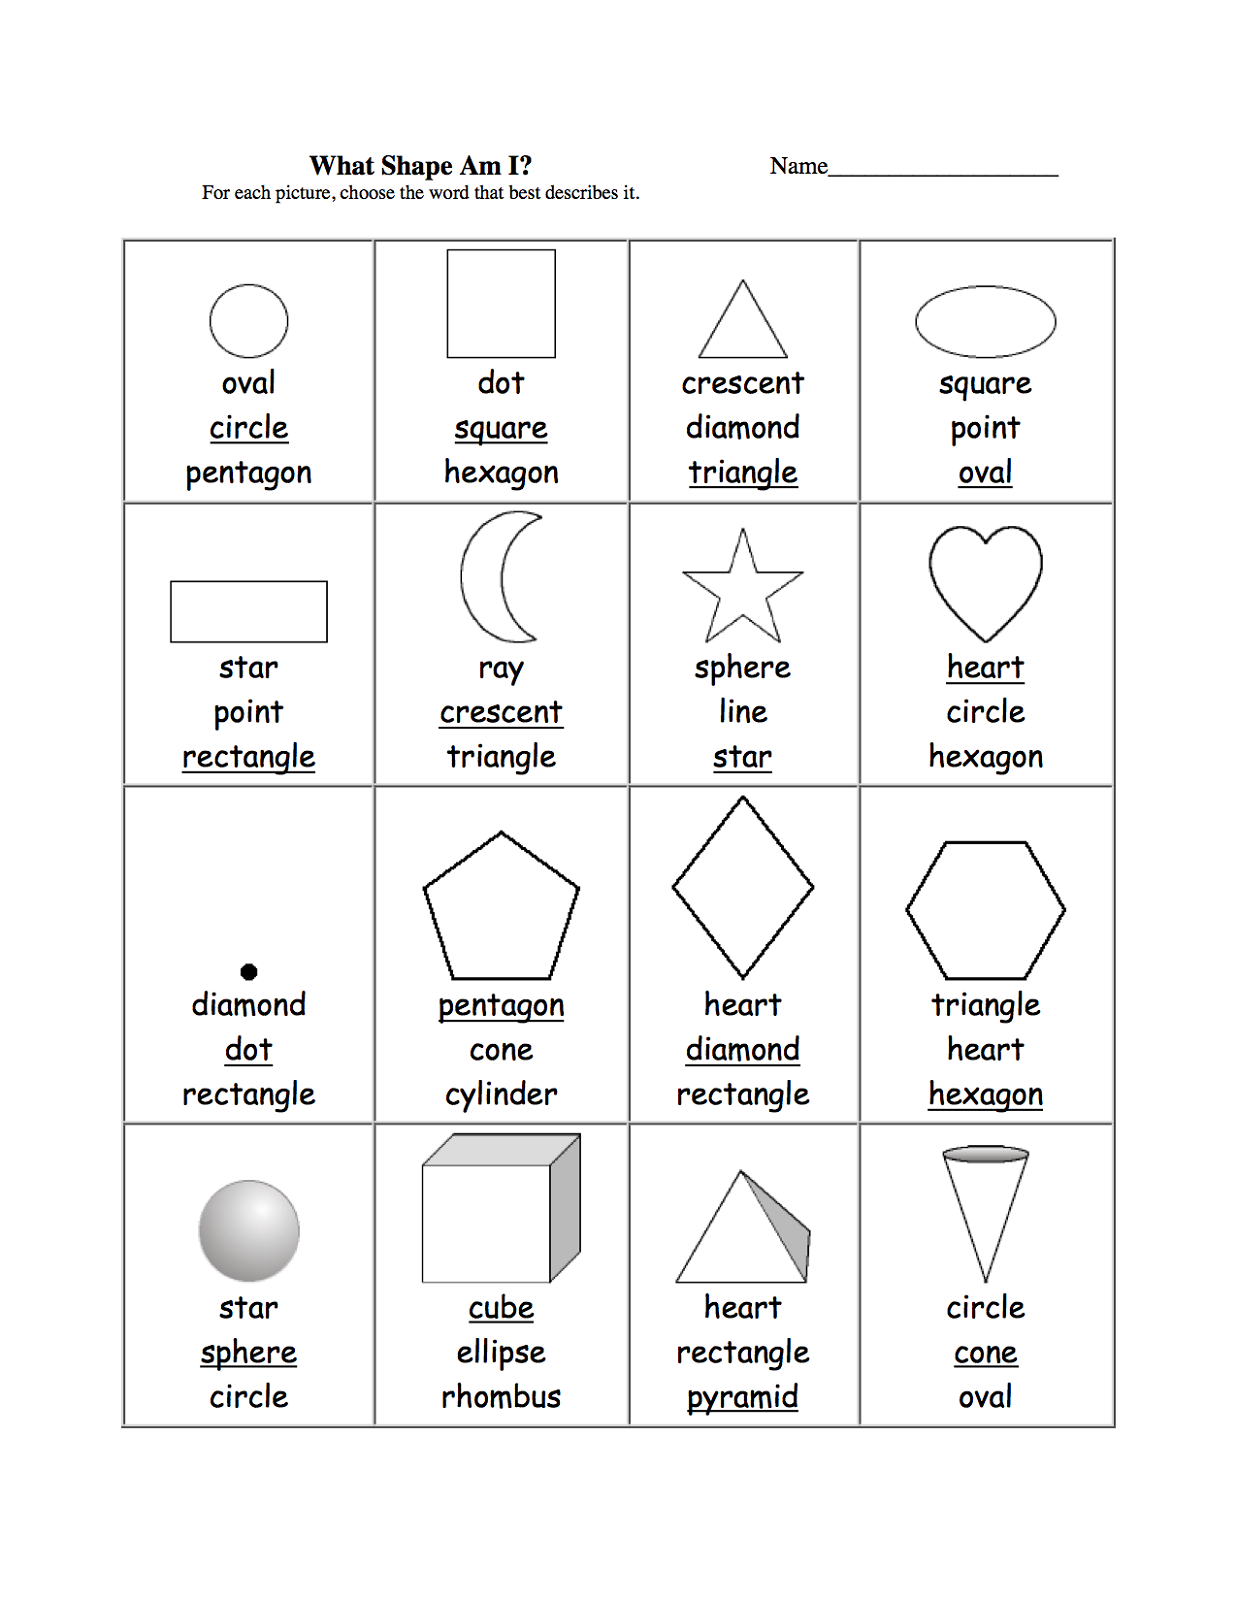 shapes-and-numbers-worksheet-myteachingstation